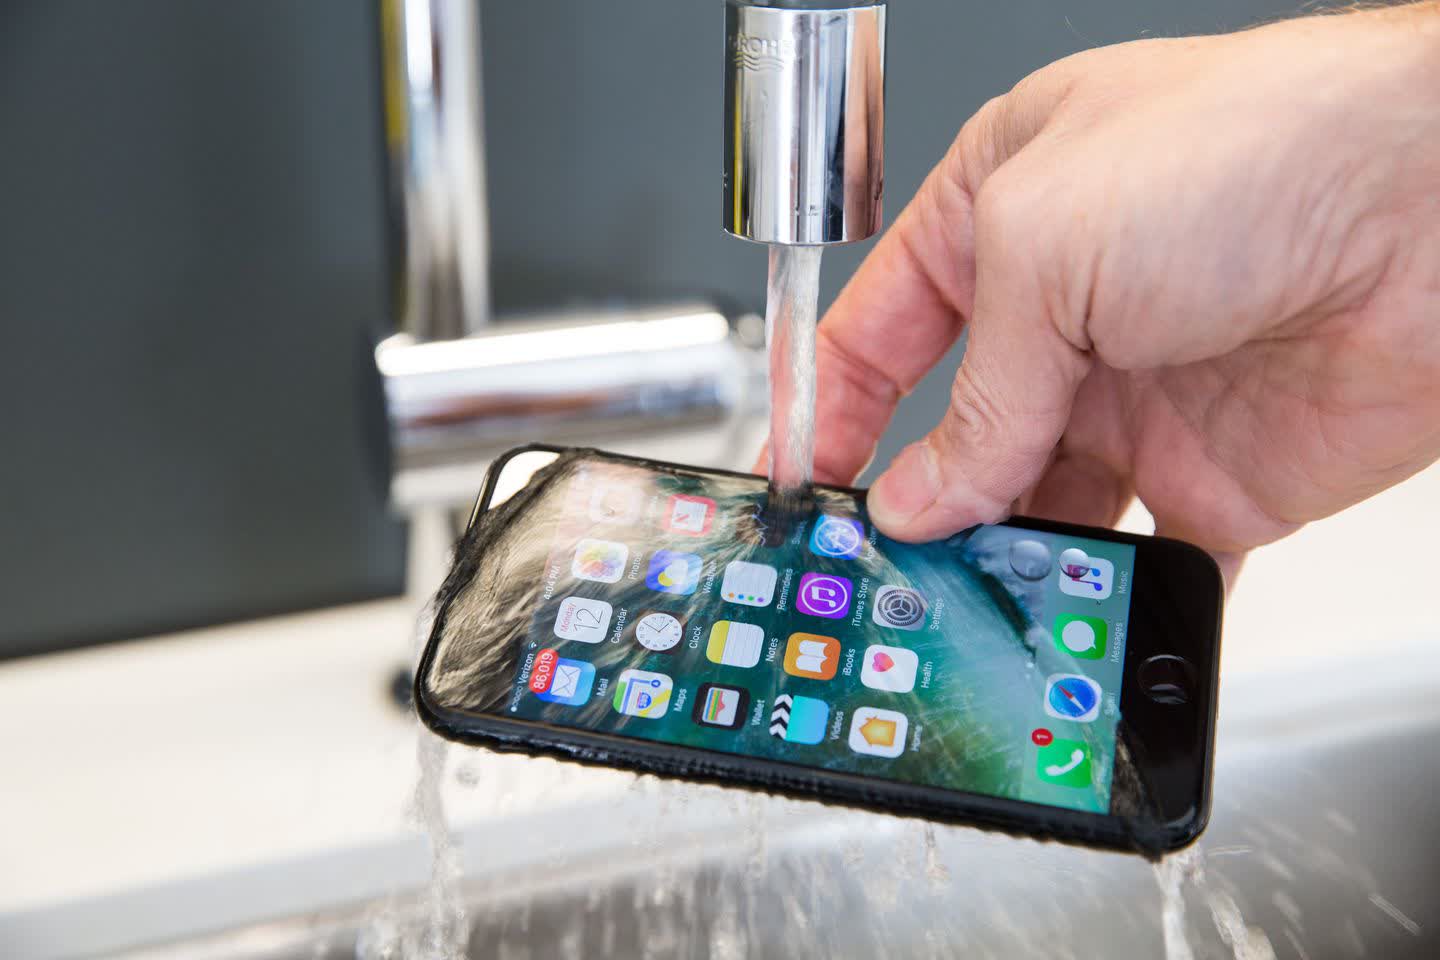 Apple hit with $12 million fine by Italian regulator over iPhone water resistance claims